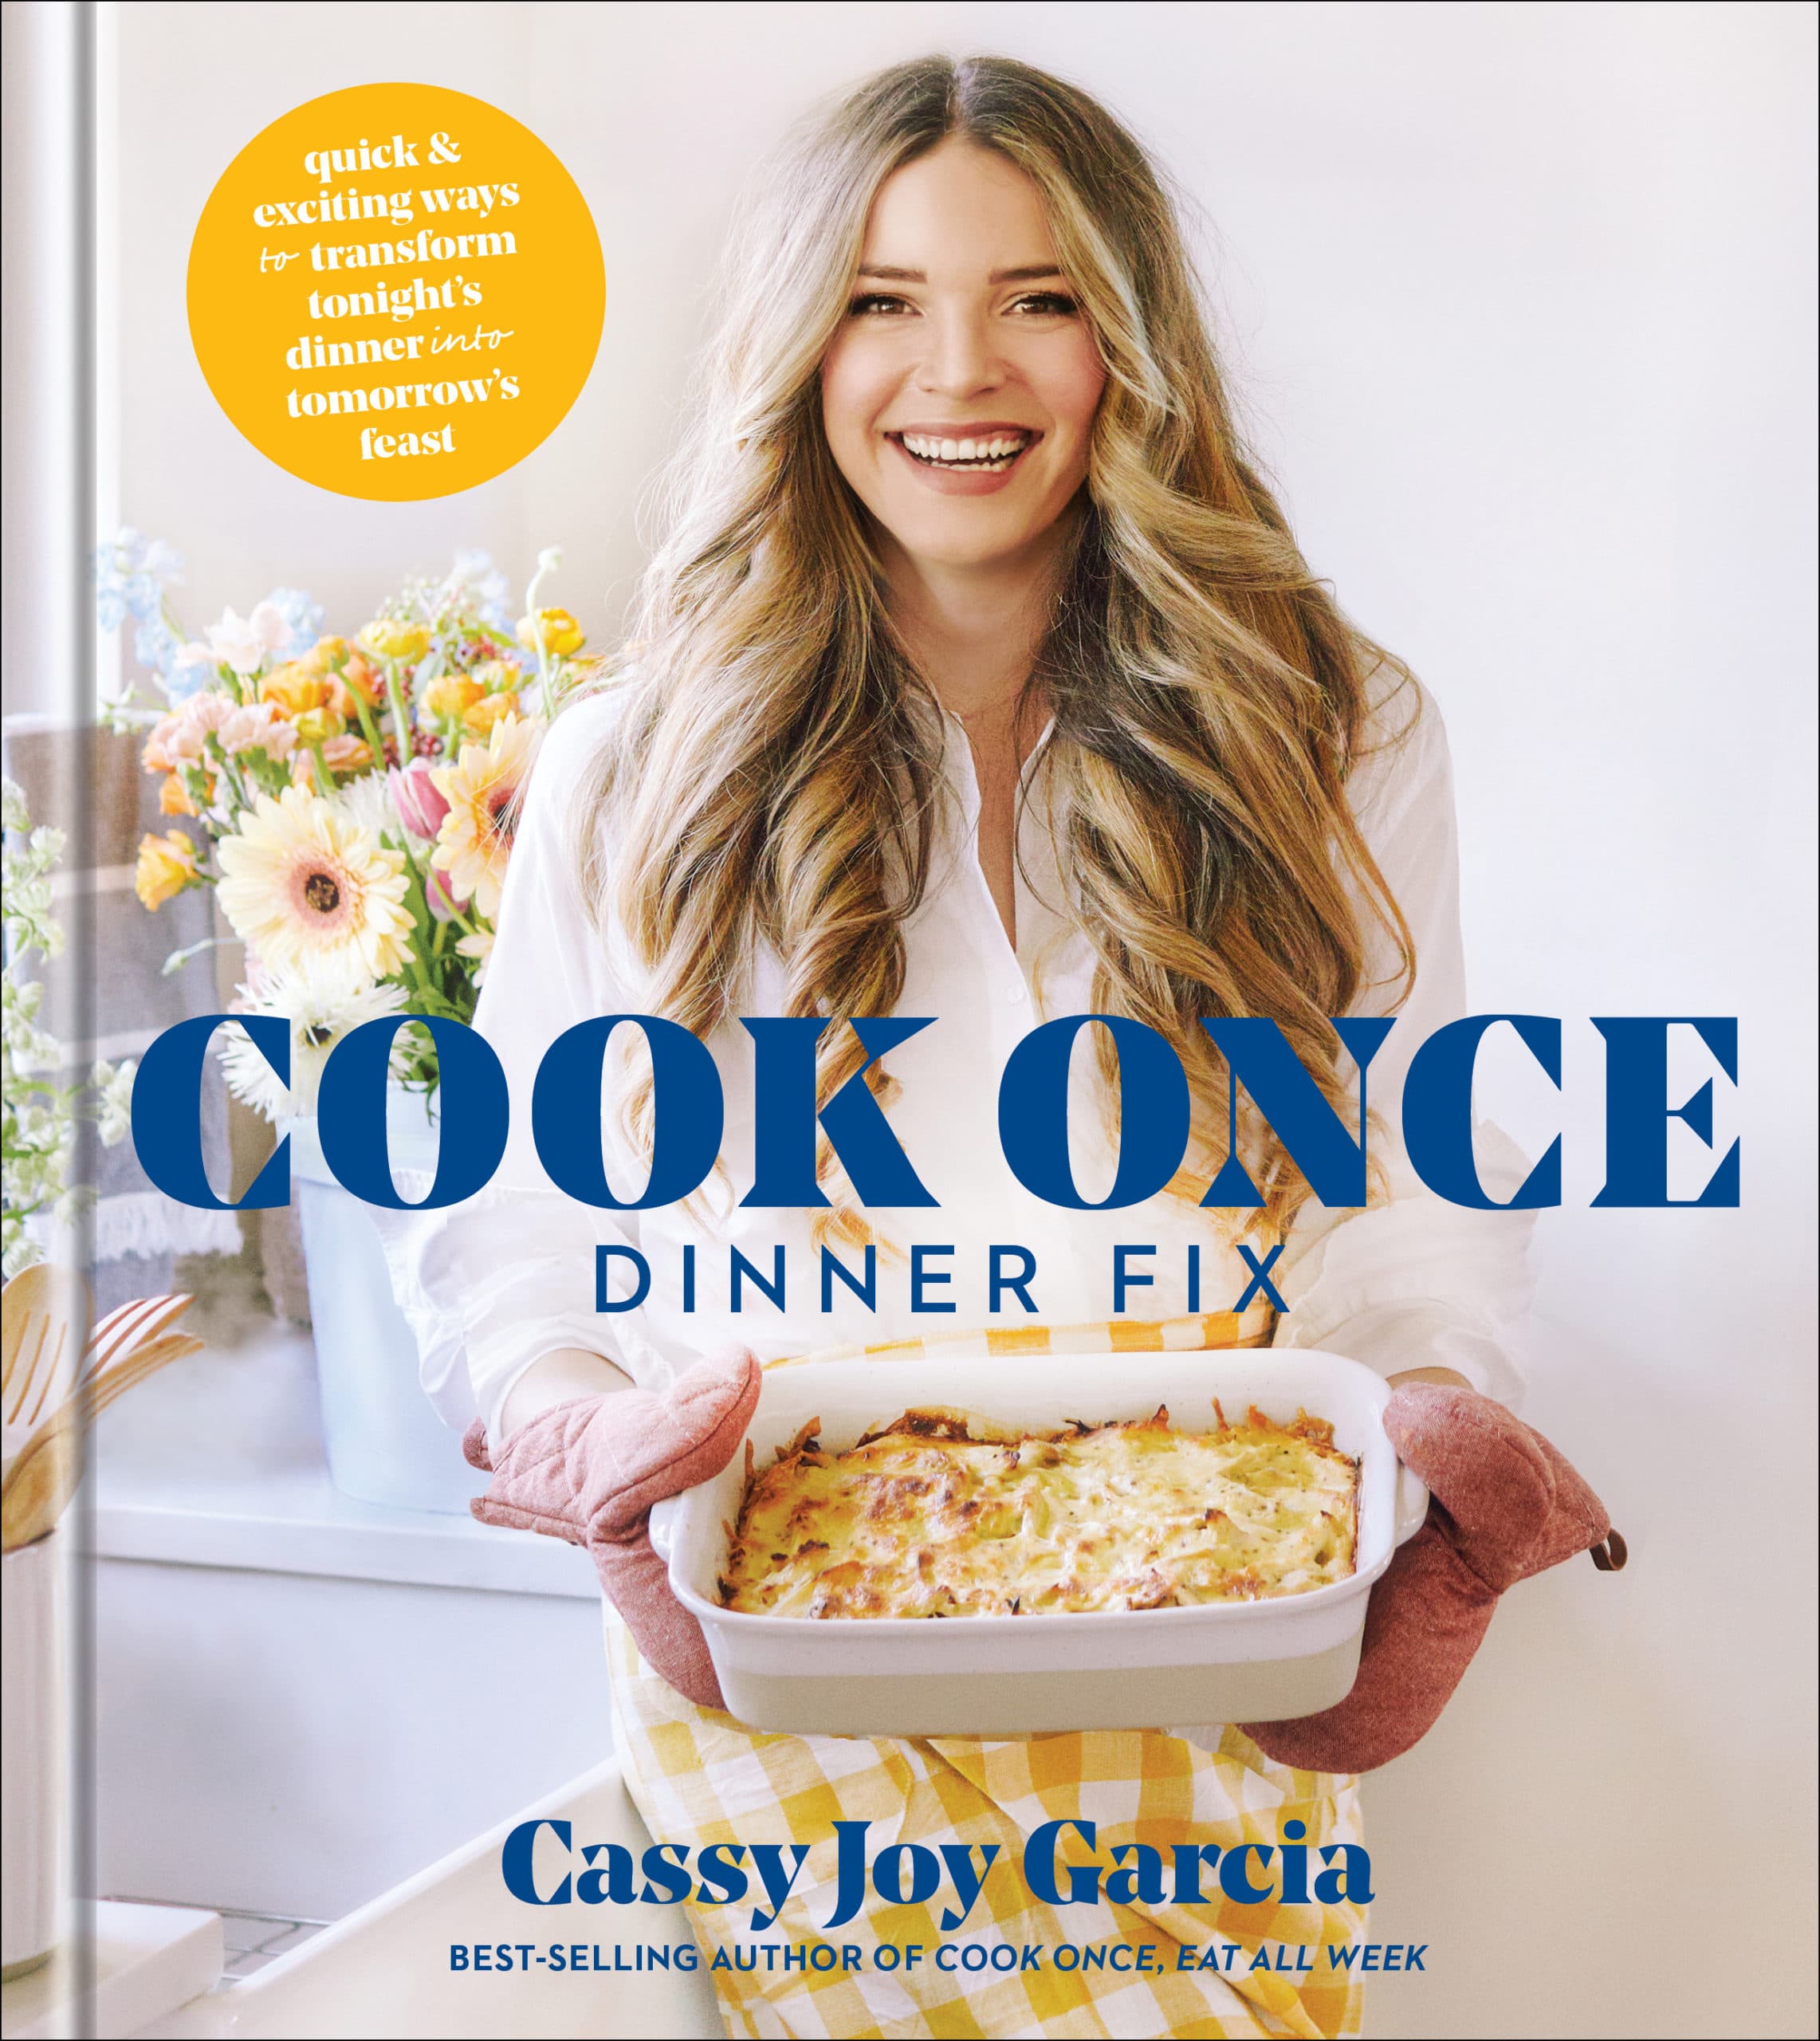 woman with brown blonde wavy hair in a white button down shirt and checkered yellow apron holding a cheesy casserole in a white dish with cook once dinner fix written on the cover